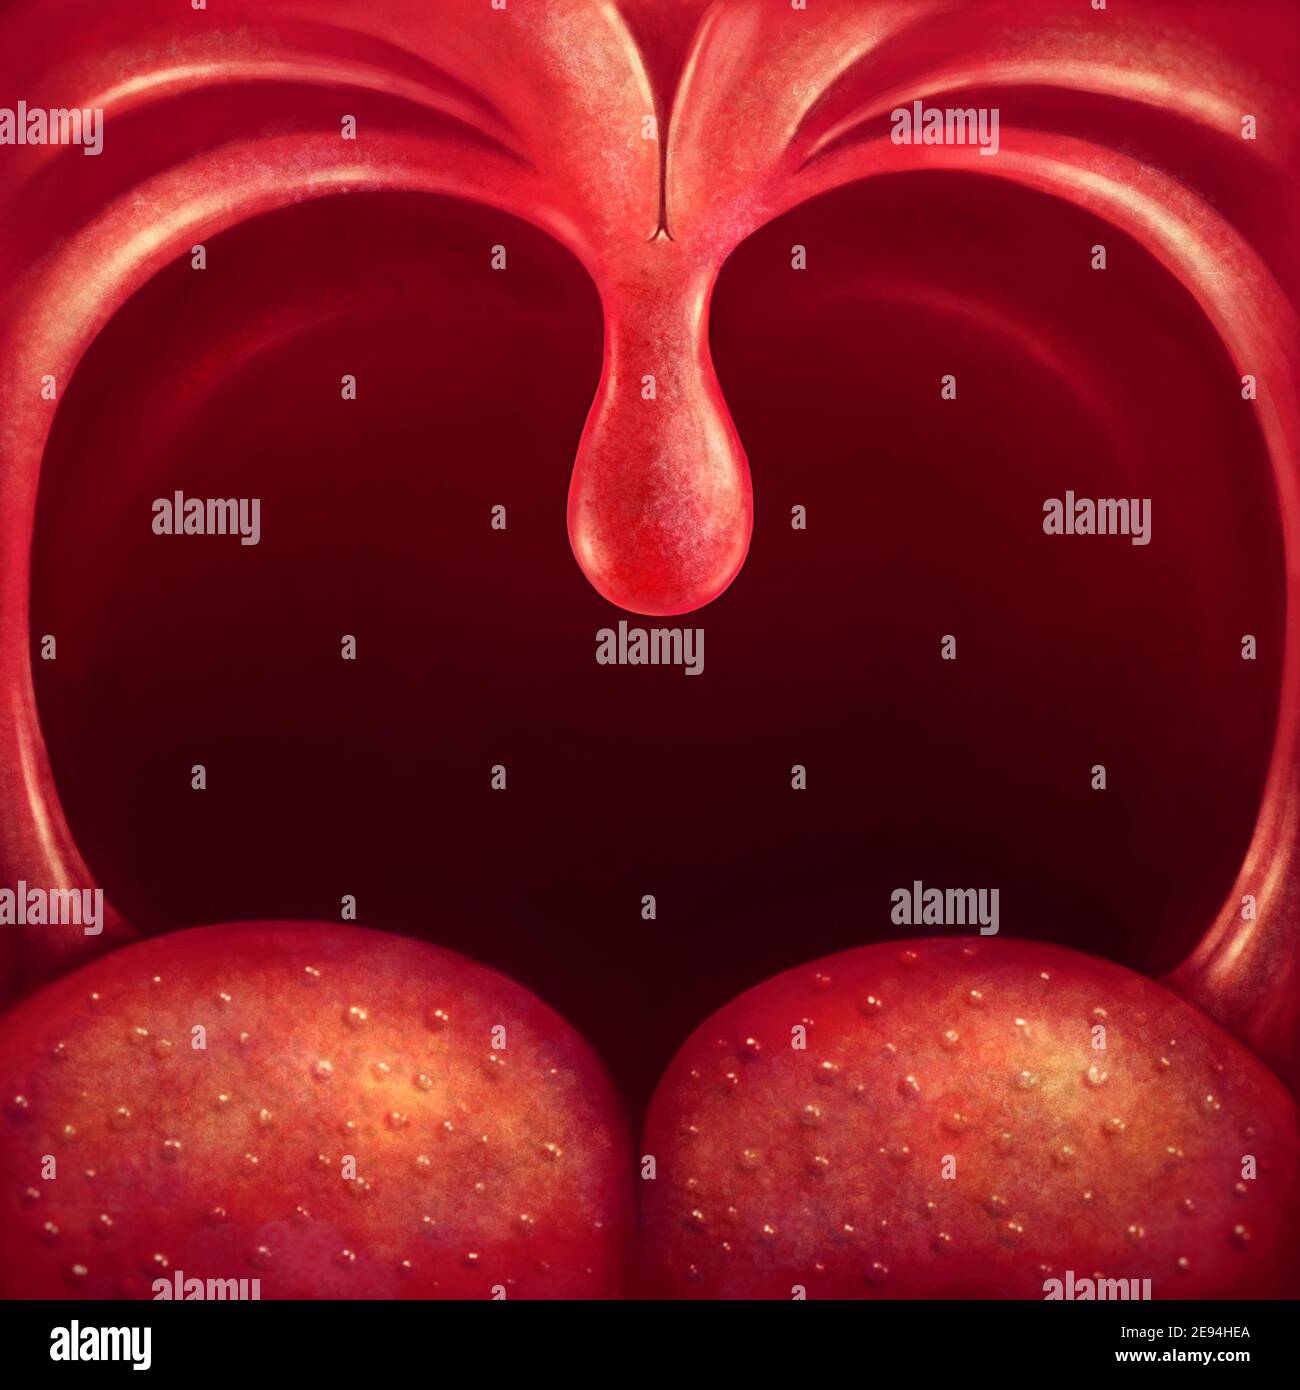 Illustration uvula in the throat close up Stock Photo